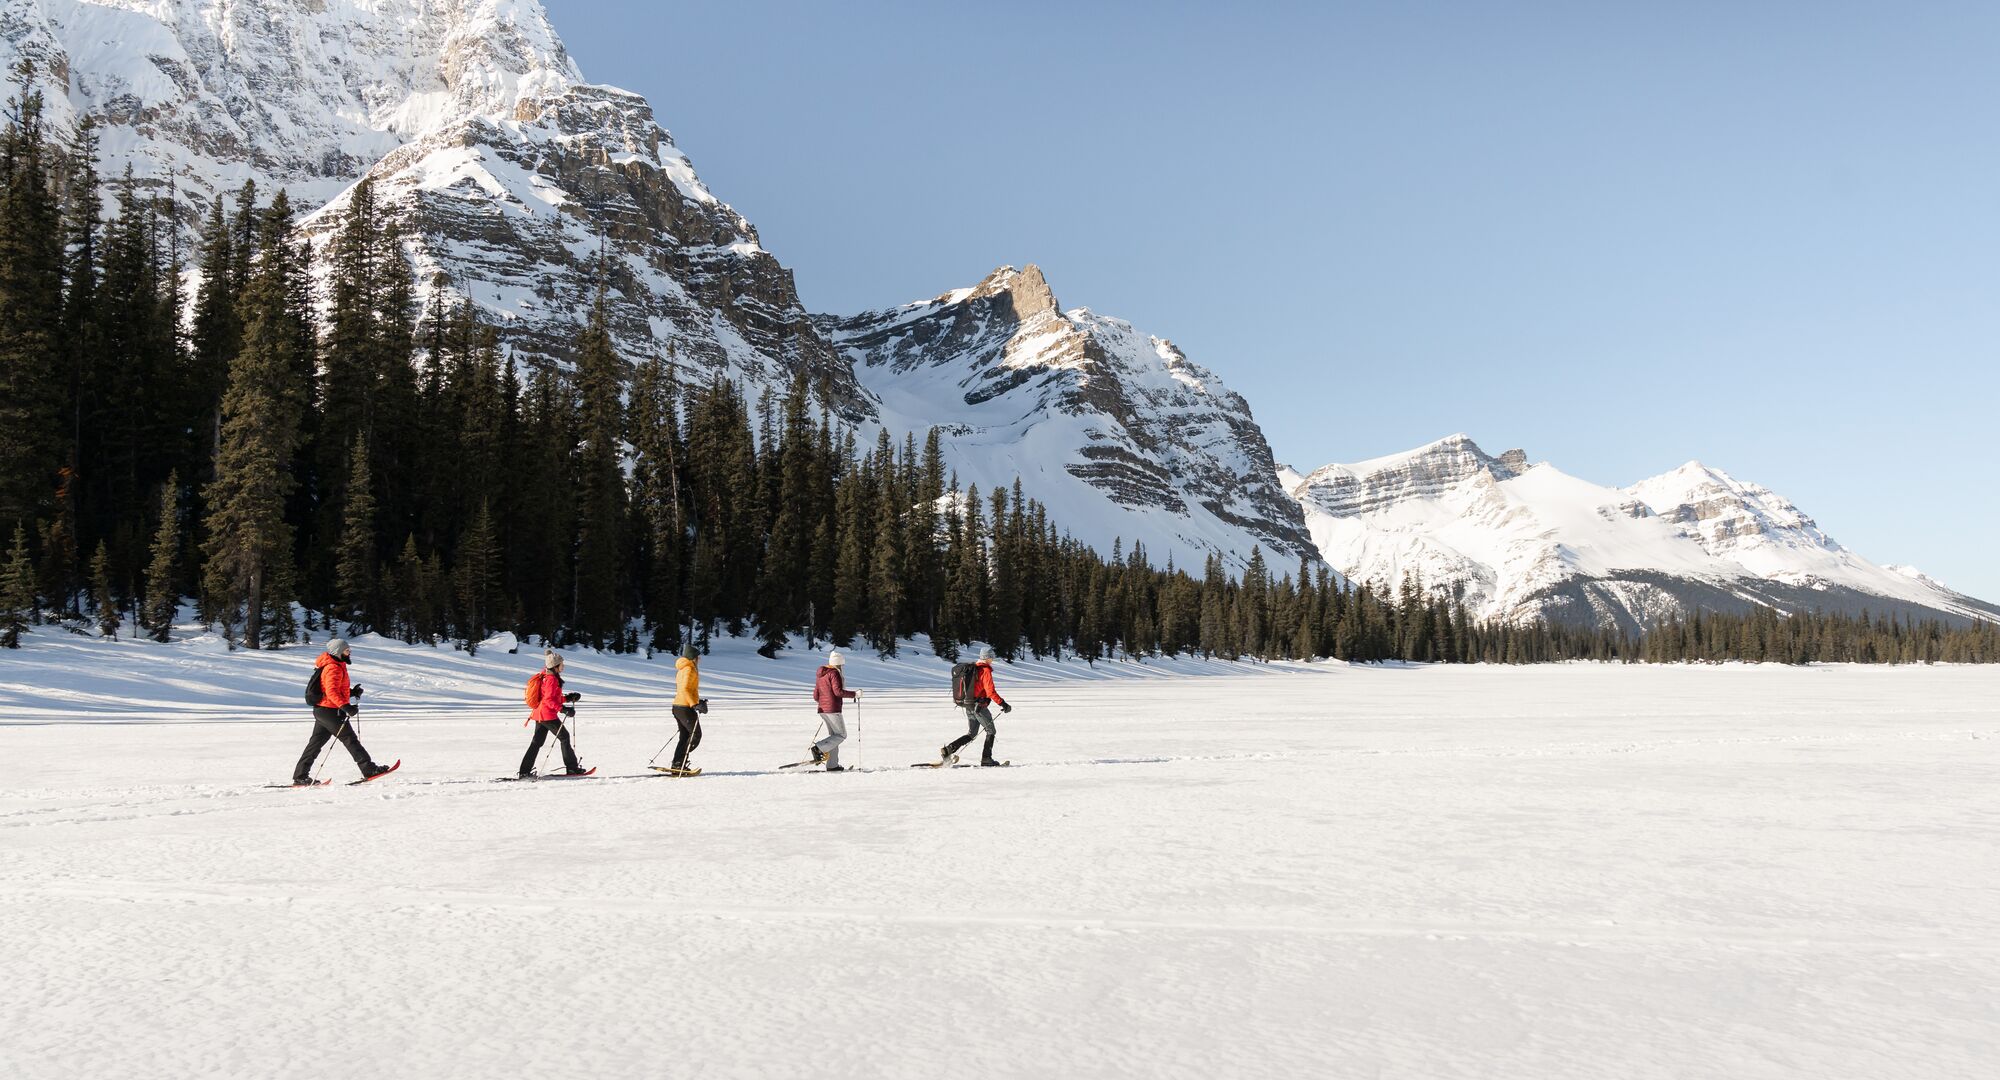 3-Day Winter Rockies Tour, Vancouver In Calgary Out in Kelowna+Okanagan Lake+Banff+Lake Louise+Johnston Canyon Complimentary Banff Hot Spring ticket